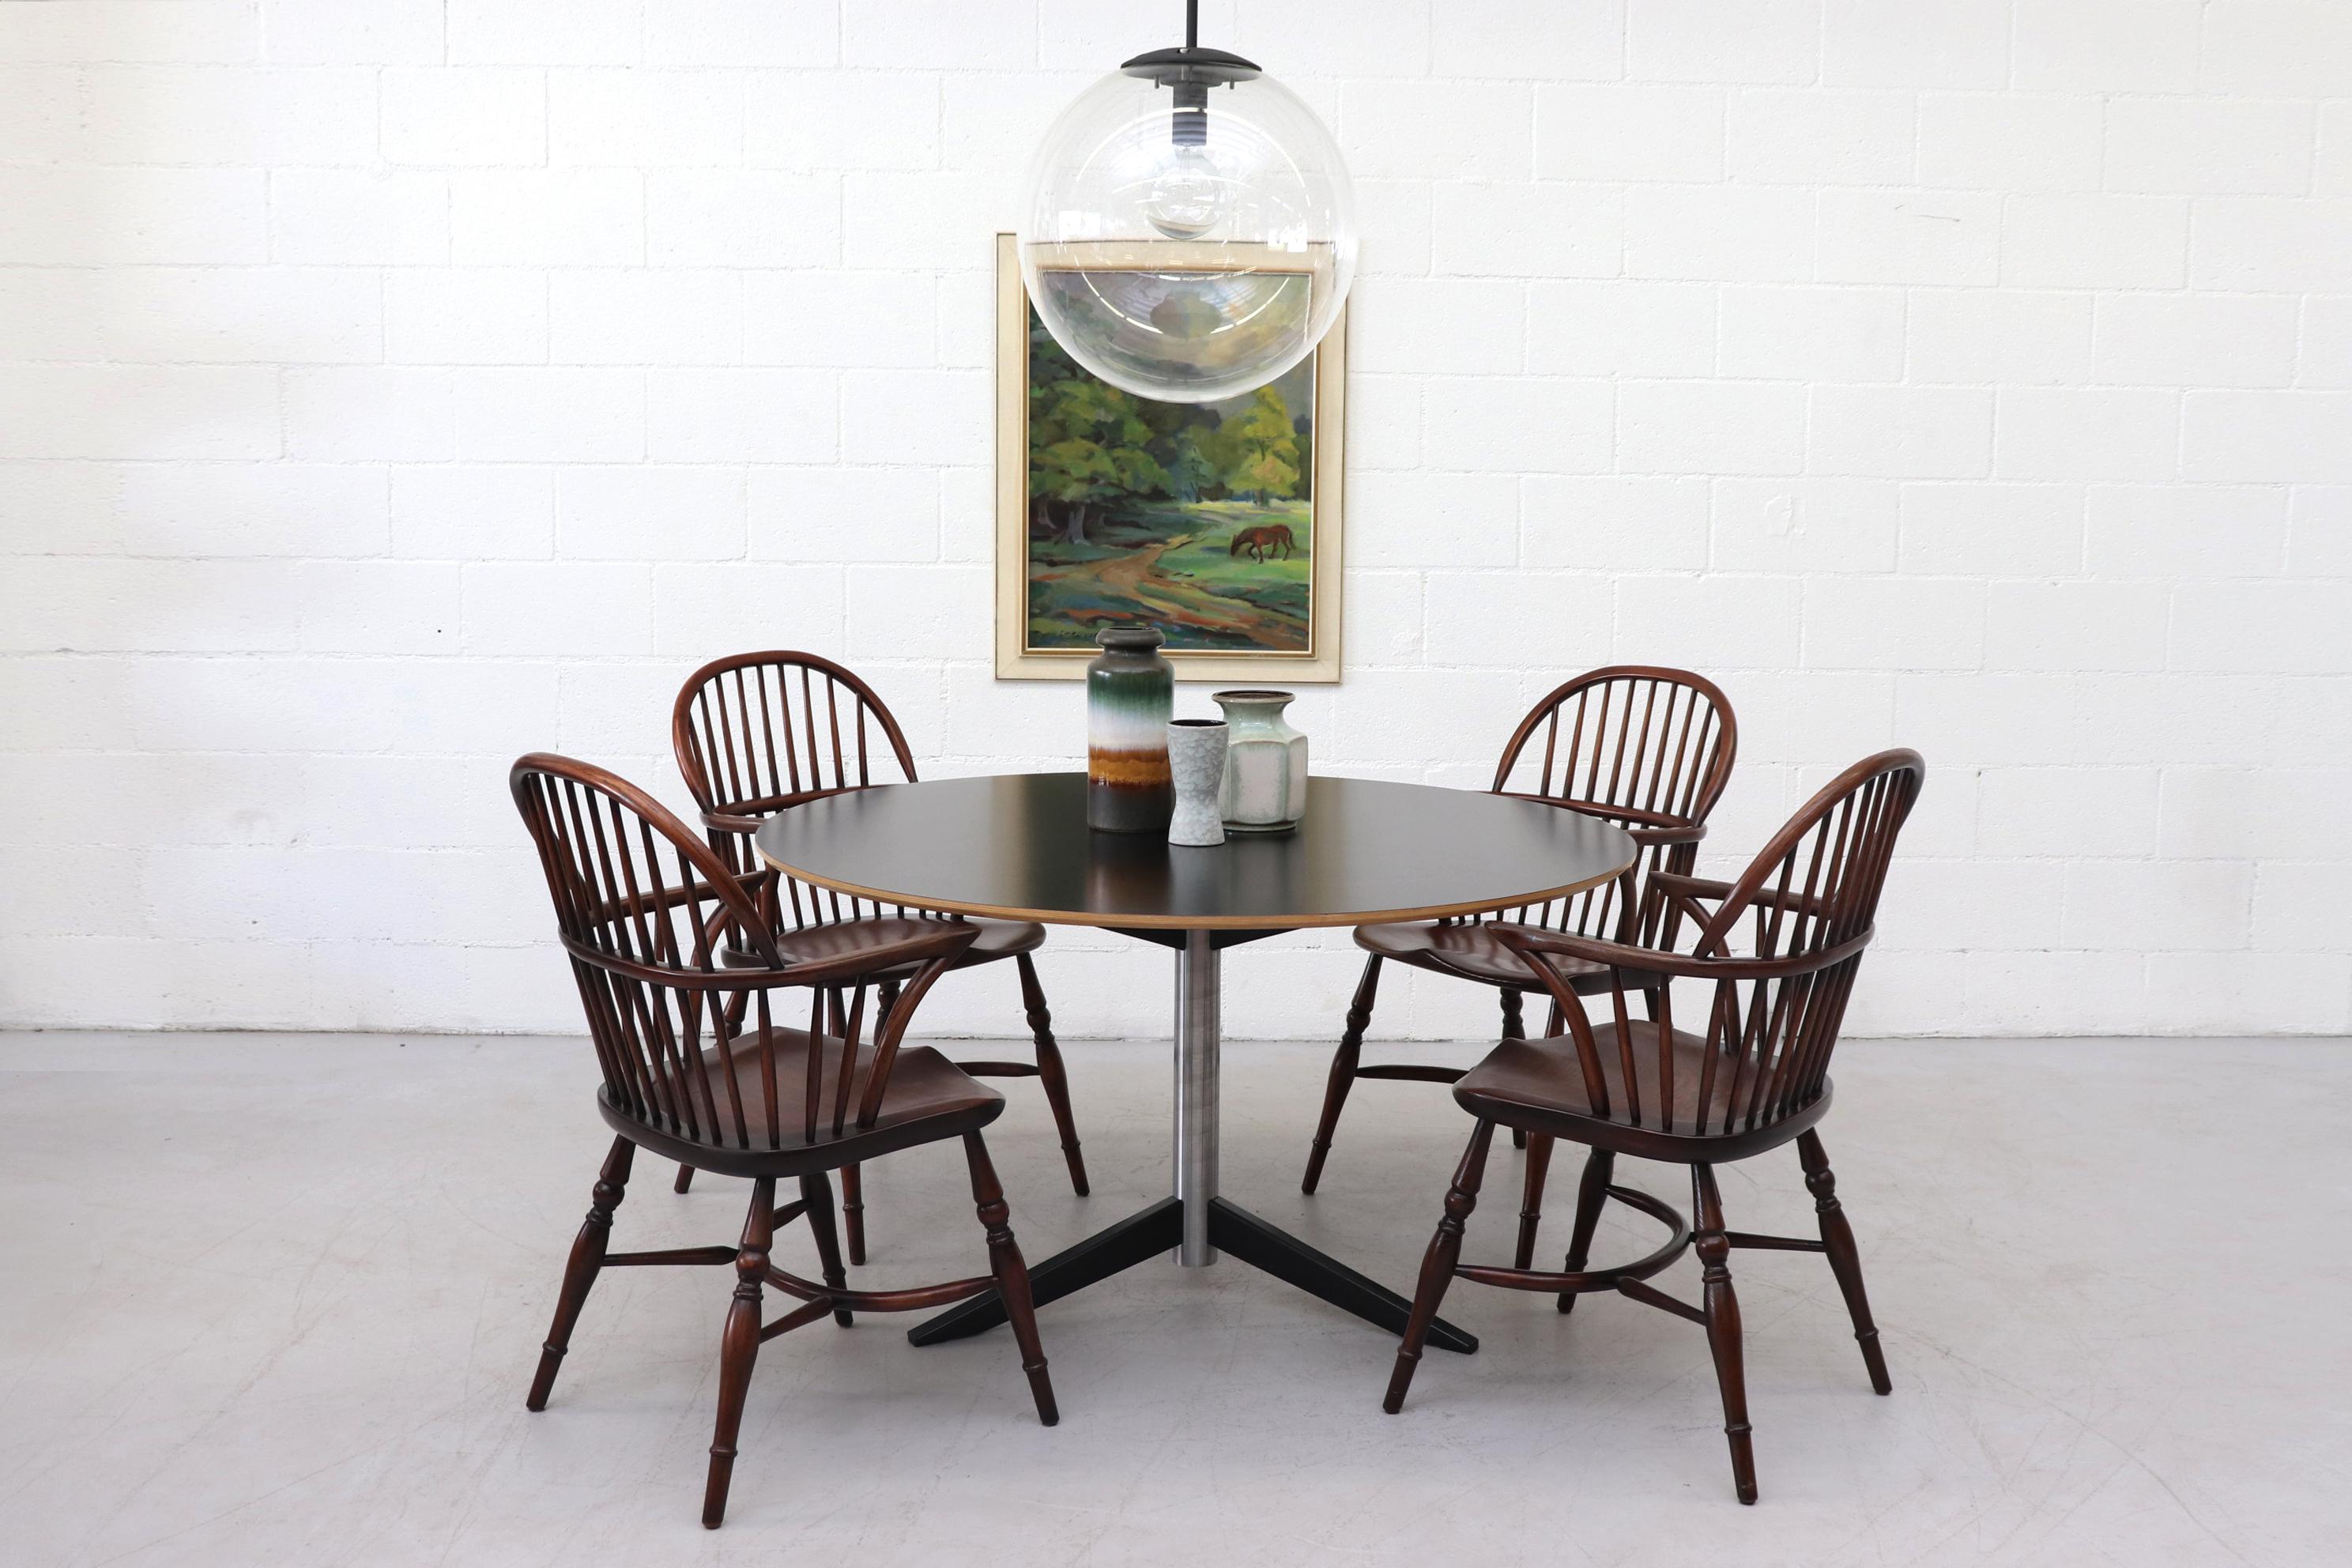 Beautiful set of 4 Windsor armchairs. Lightly refinished with Rustic style and beautiful wood work. In original condition with minimal wear or scratching. Shown with Martin Visser TE06 dining table ( LU922416005961), RAAK style globe pendant ()